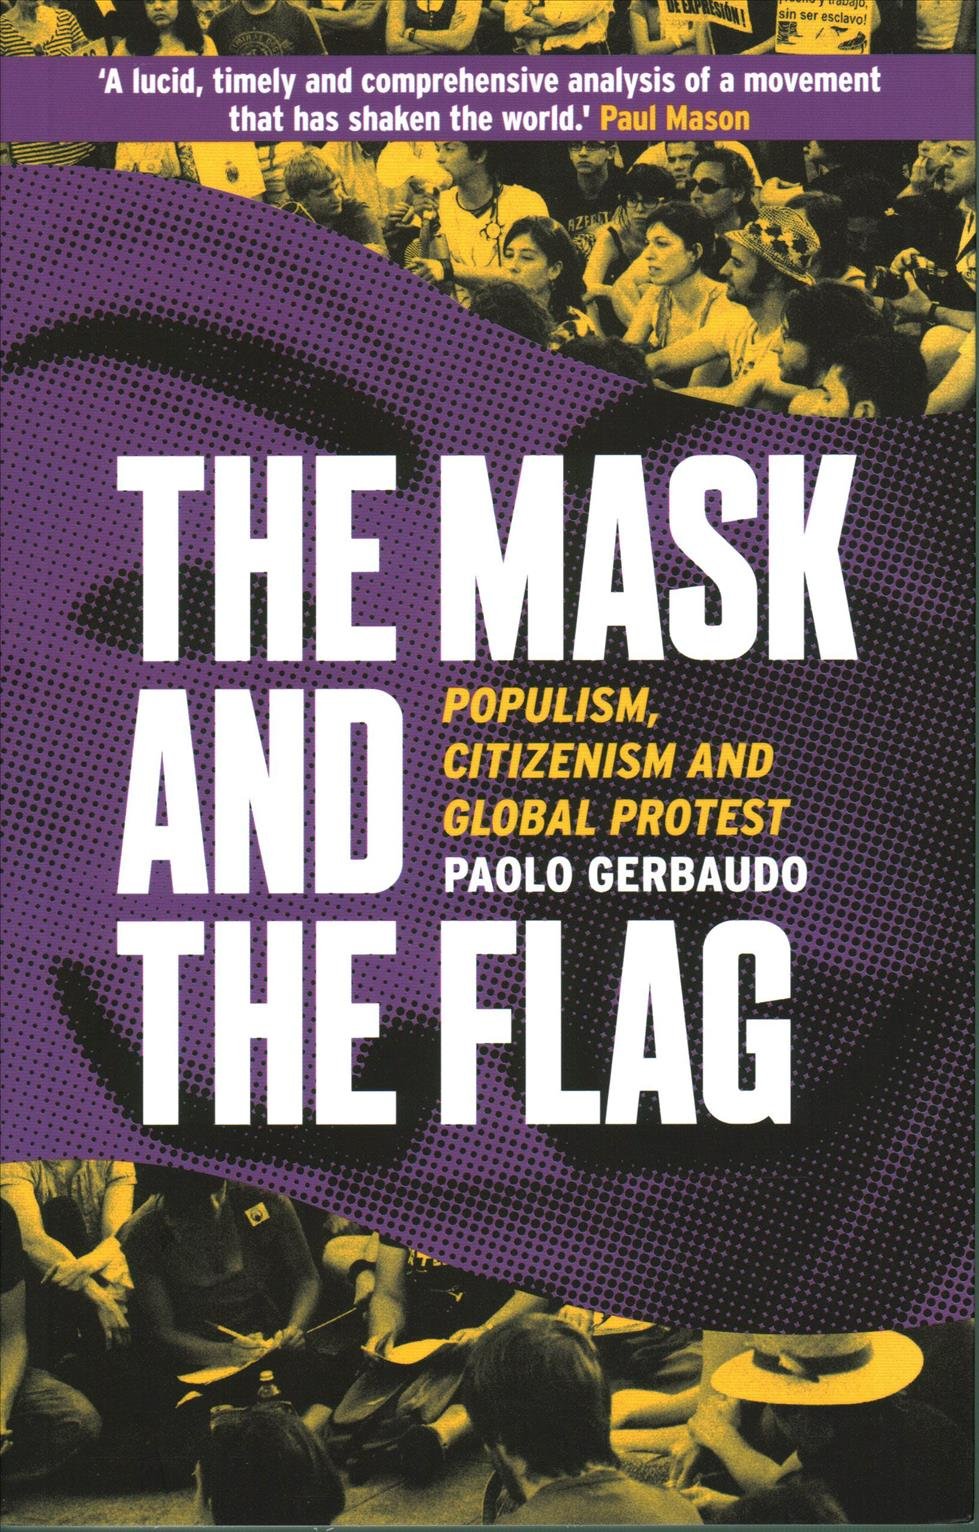 The Mask and the Flag